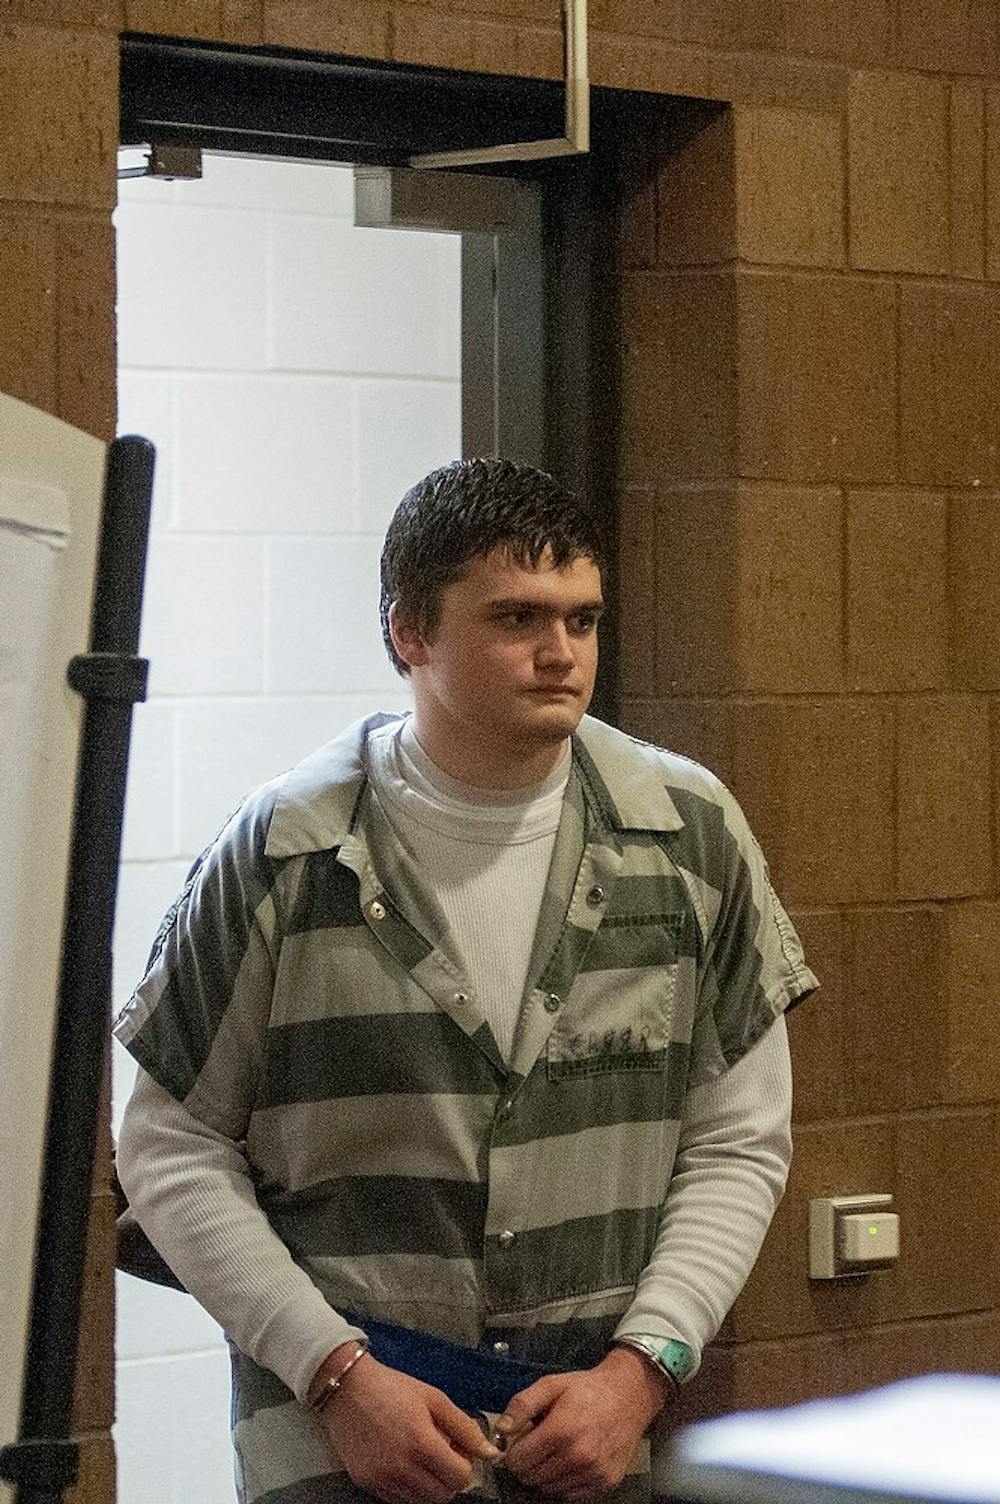 	<p>Okemos resident Connor McCowan is walks into the after a brief break during the preliminary exam of the fatal stabbing of <span class="caps">MSU</span> student Andrew Singler on April 18, 2013, at Ingham County District Judge Donald Allen&#8217;s courtroom in Mason, Mich. McCowan is standing trial for allegedly killing 23-year-old Singler in February. Natalie Kolb/The State News</p>